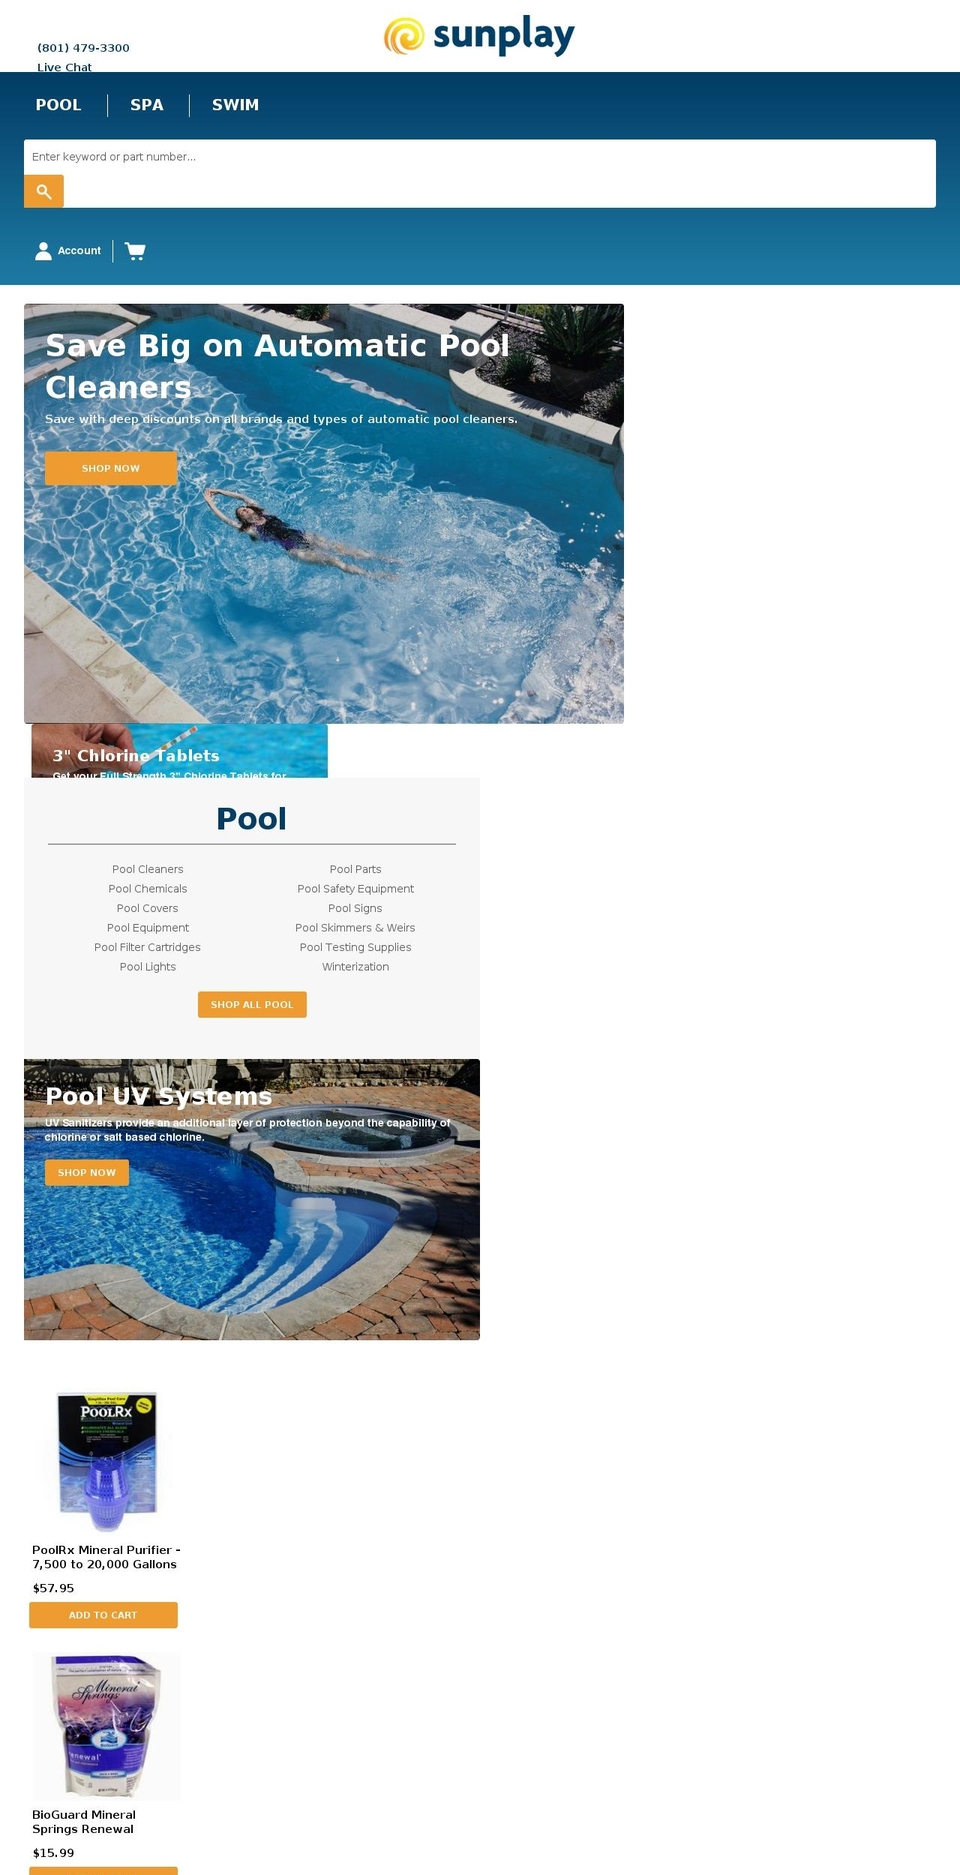 Sunplay v1.0 [Speck - Collection] Shopify theme site example sunplay.agency